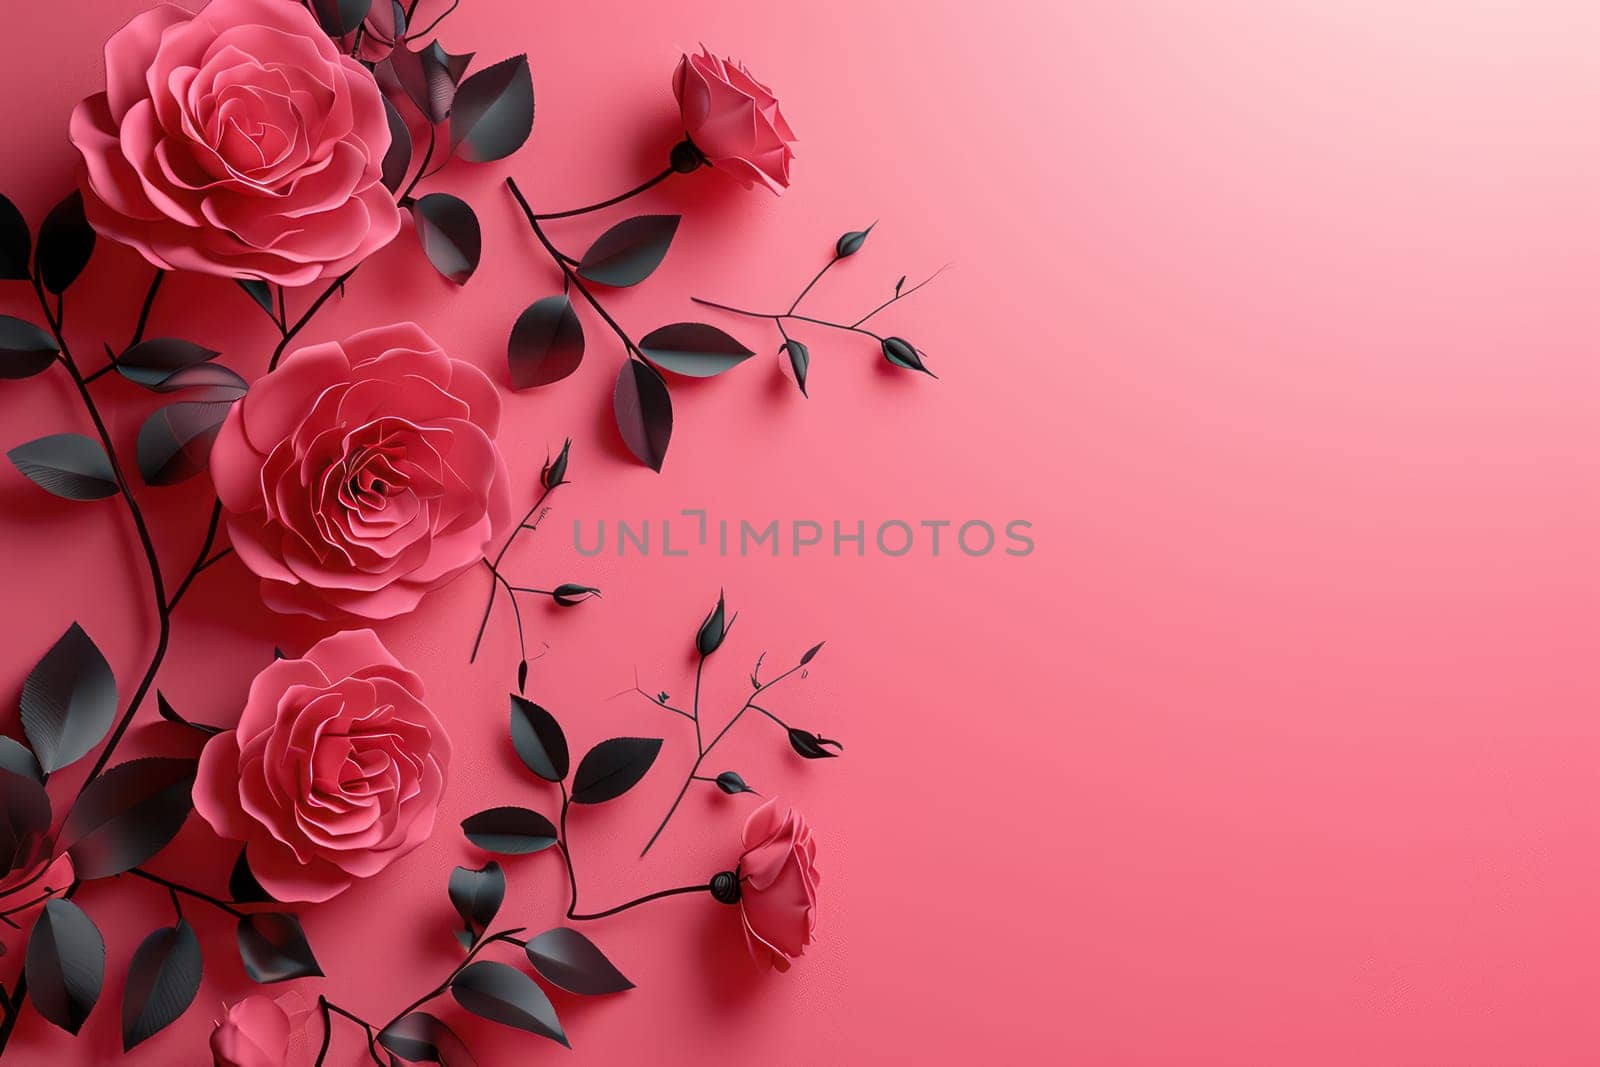 Roses pink shadow over pink background by golfmerrymaker